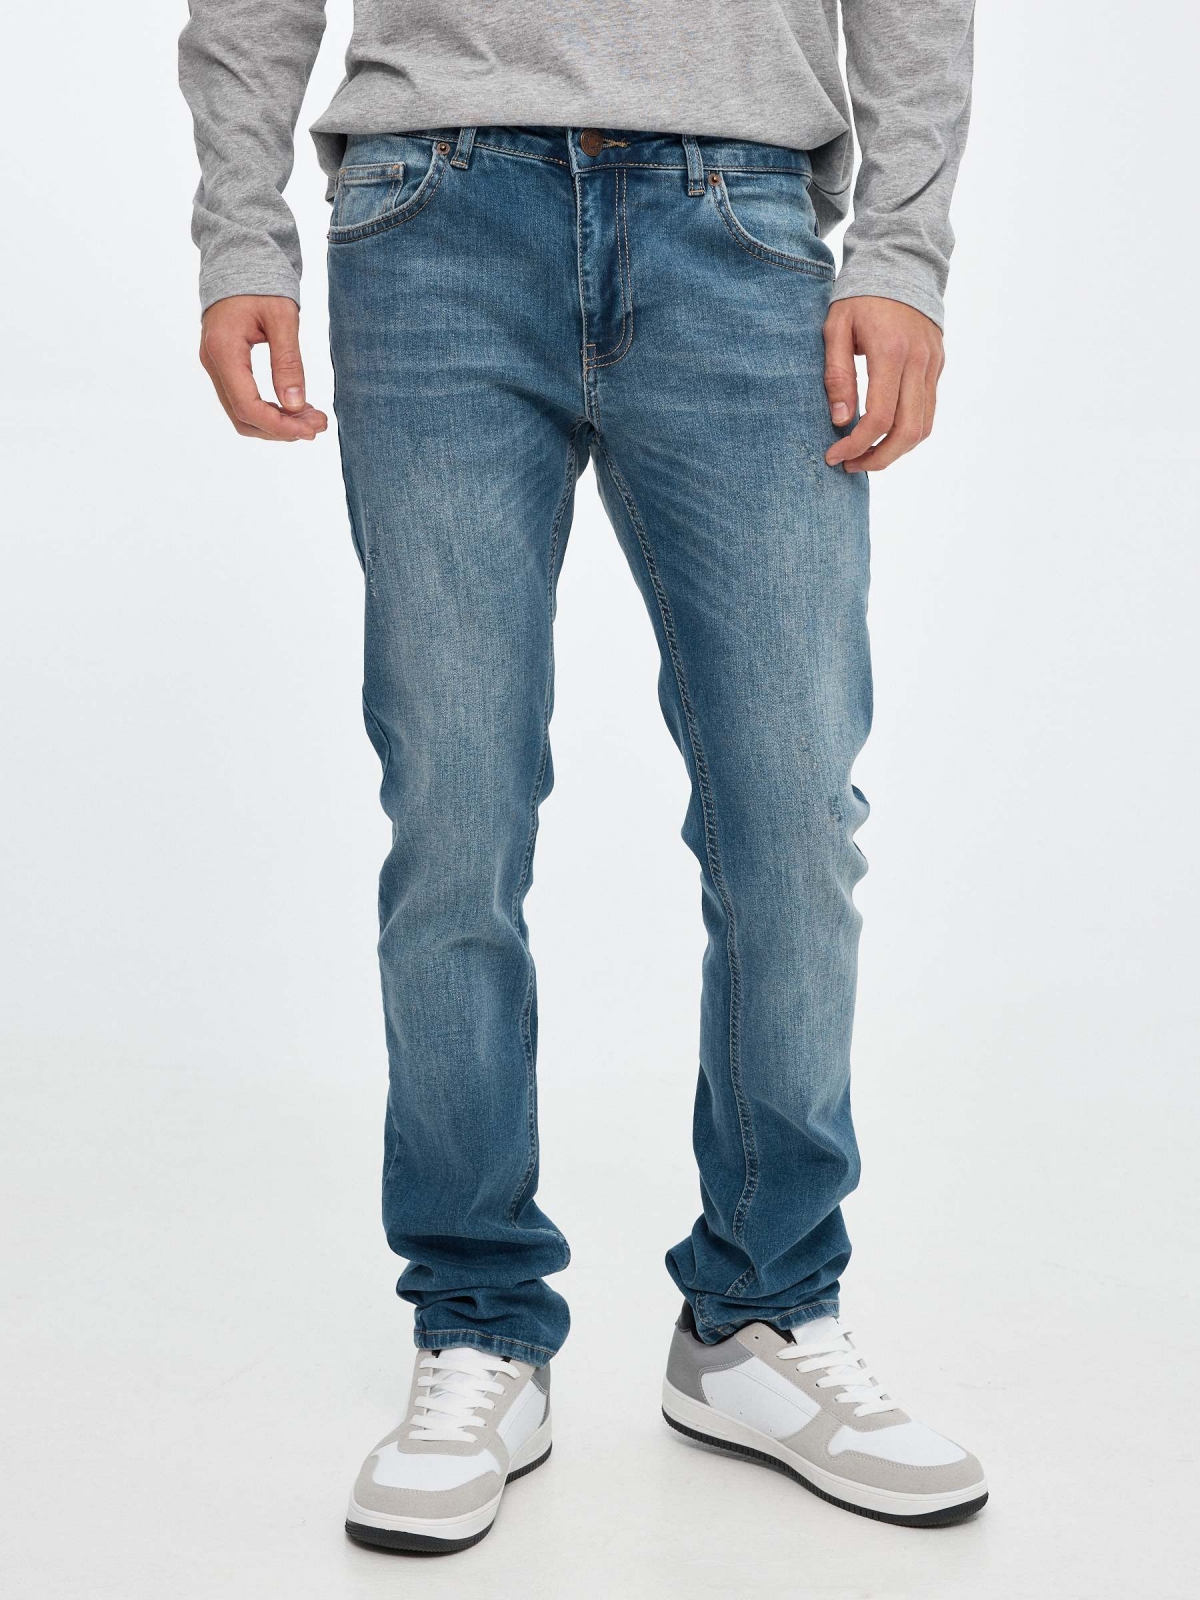 Regular jeans blue middle front view